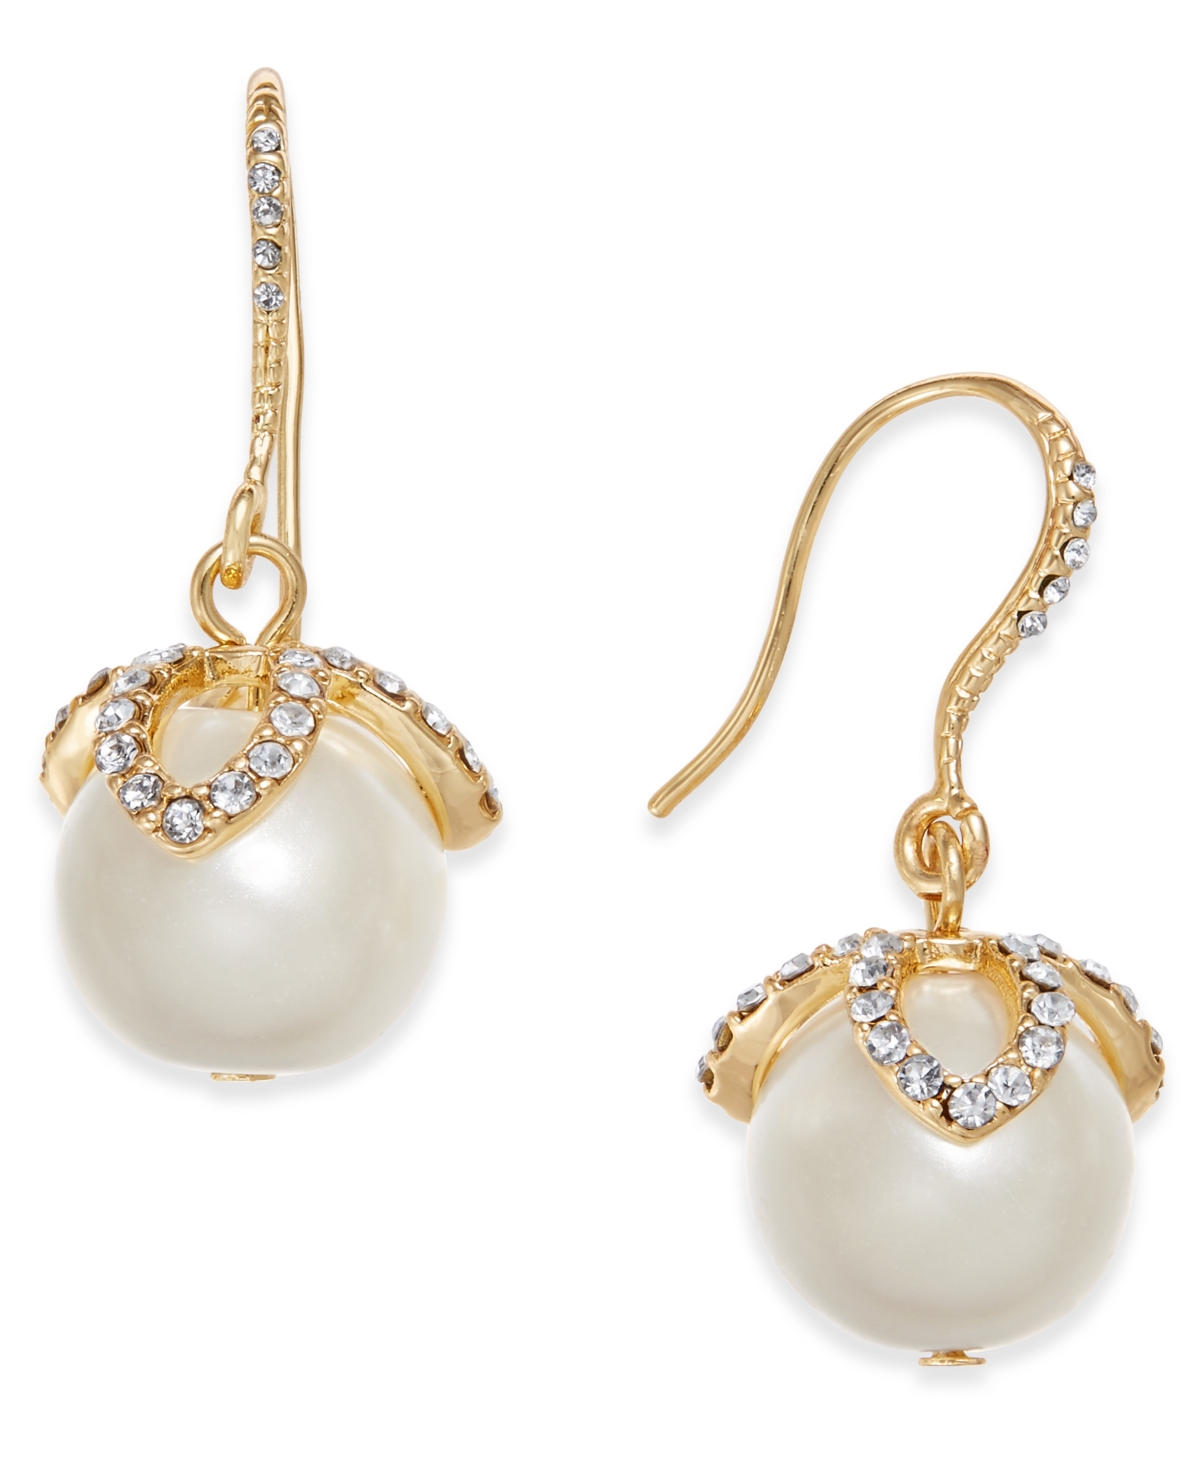 Gold-Tone Imitation Pearl & Pave Drop Earrings, Created for Macy's - Gold